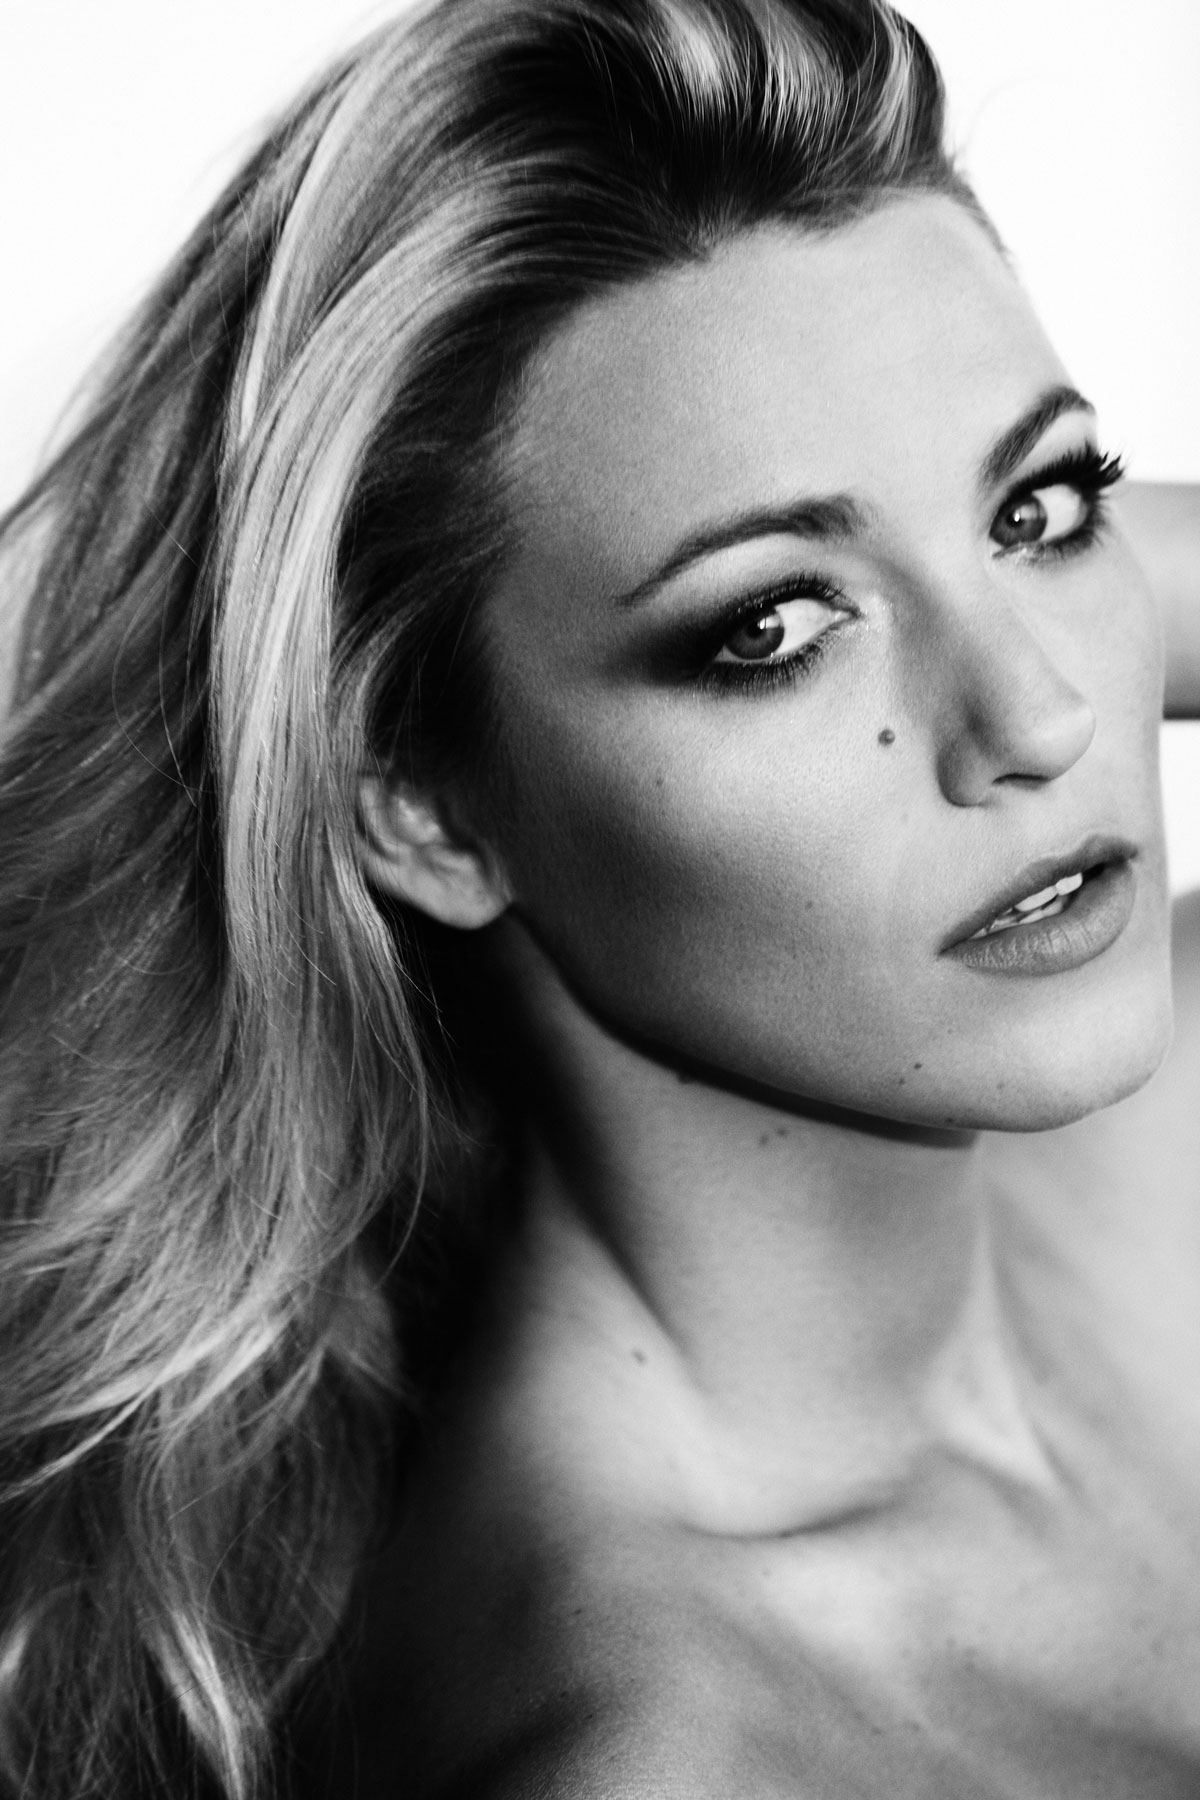 BLAKE LIVELY, THE NEW FACE OF L’OREAL PARIS